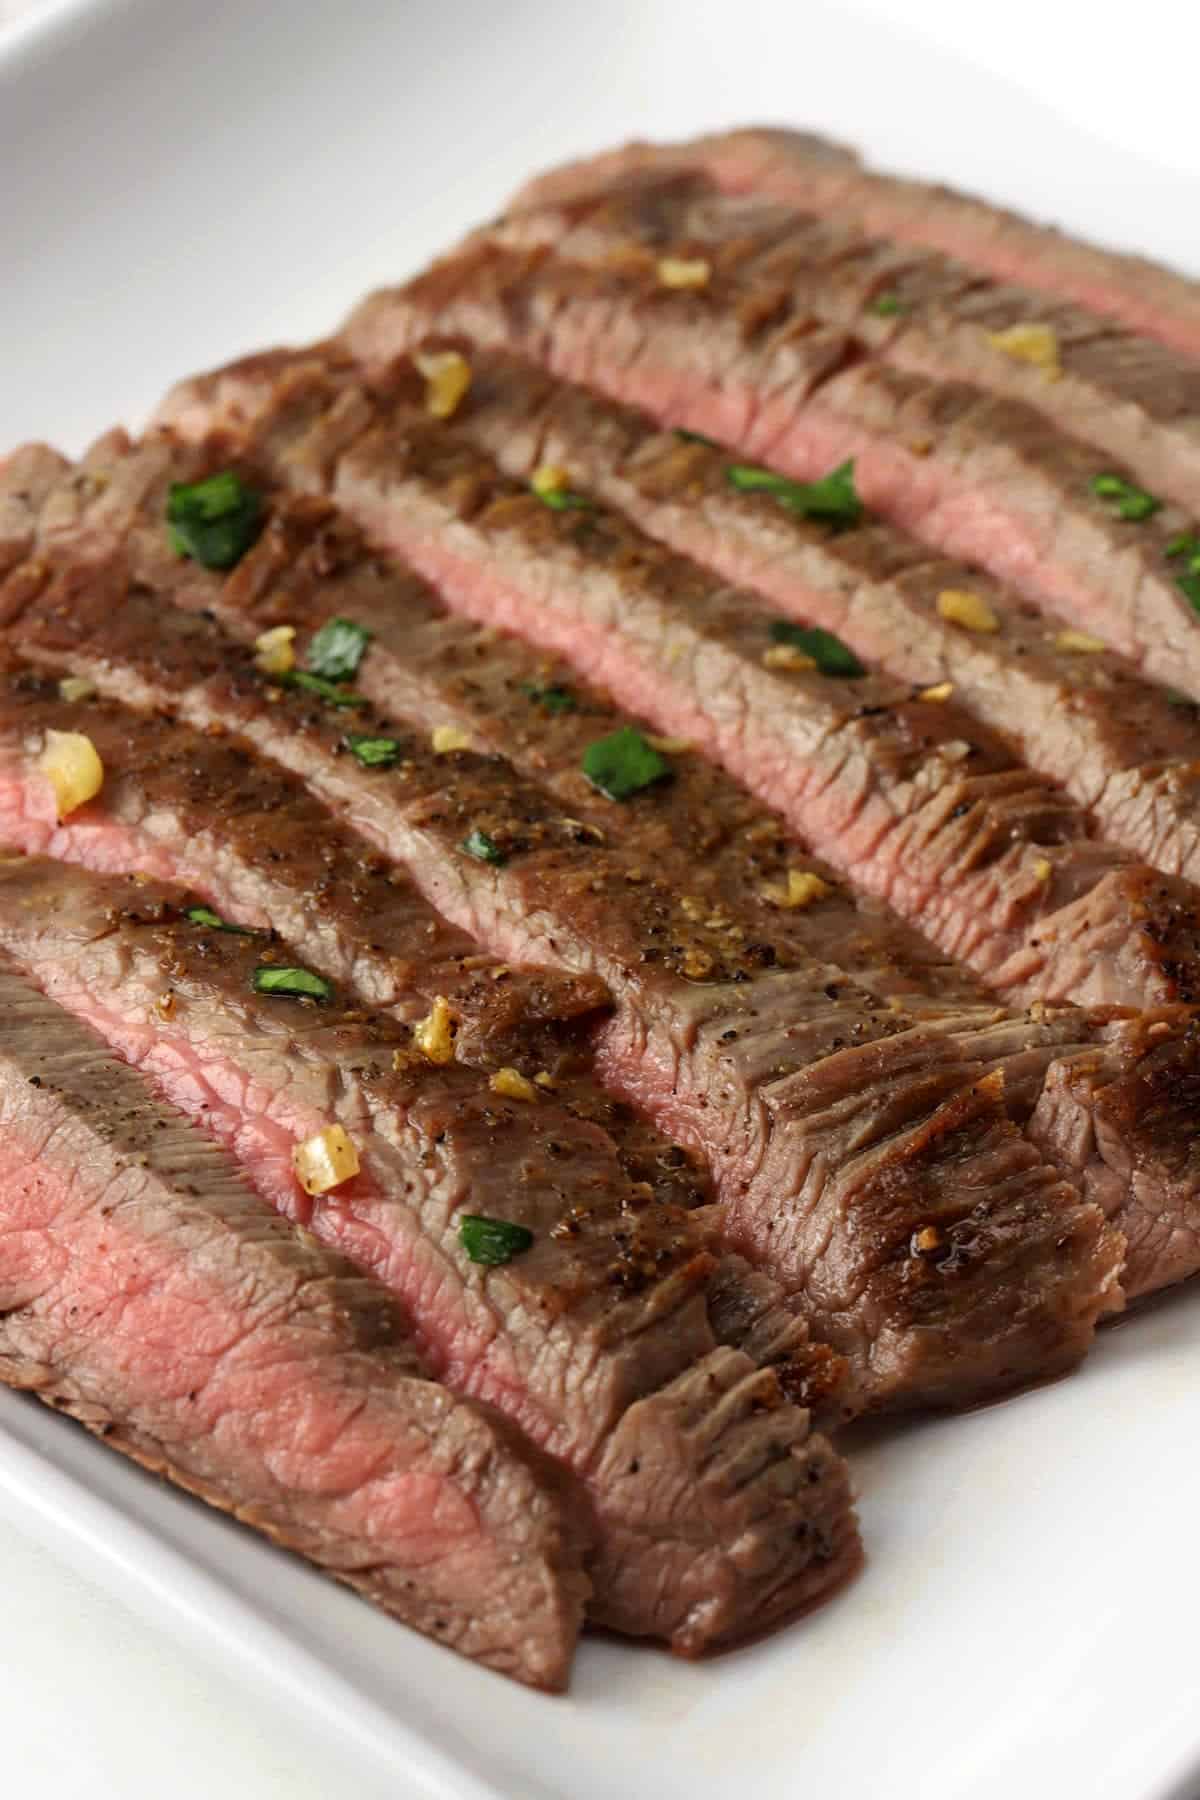 Sliced flank steak topped with garlic butter and fresh parsley.